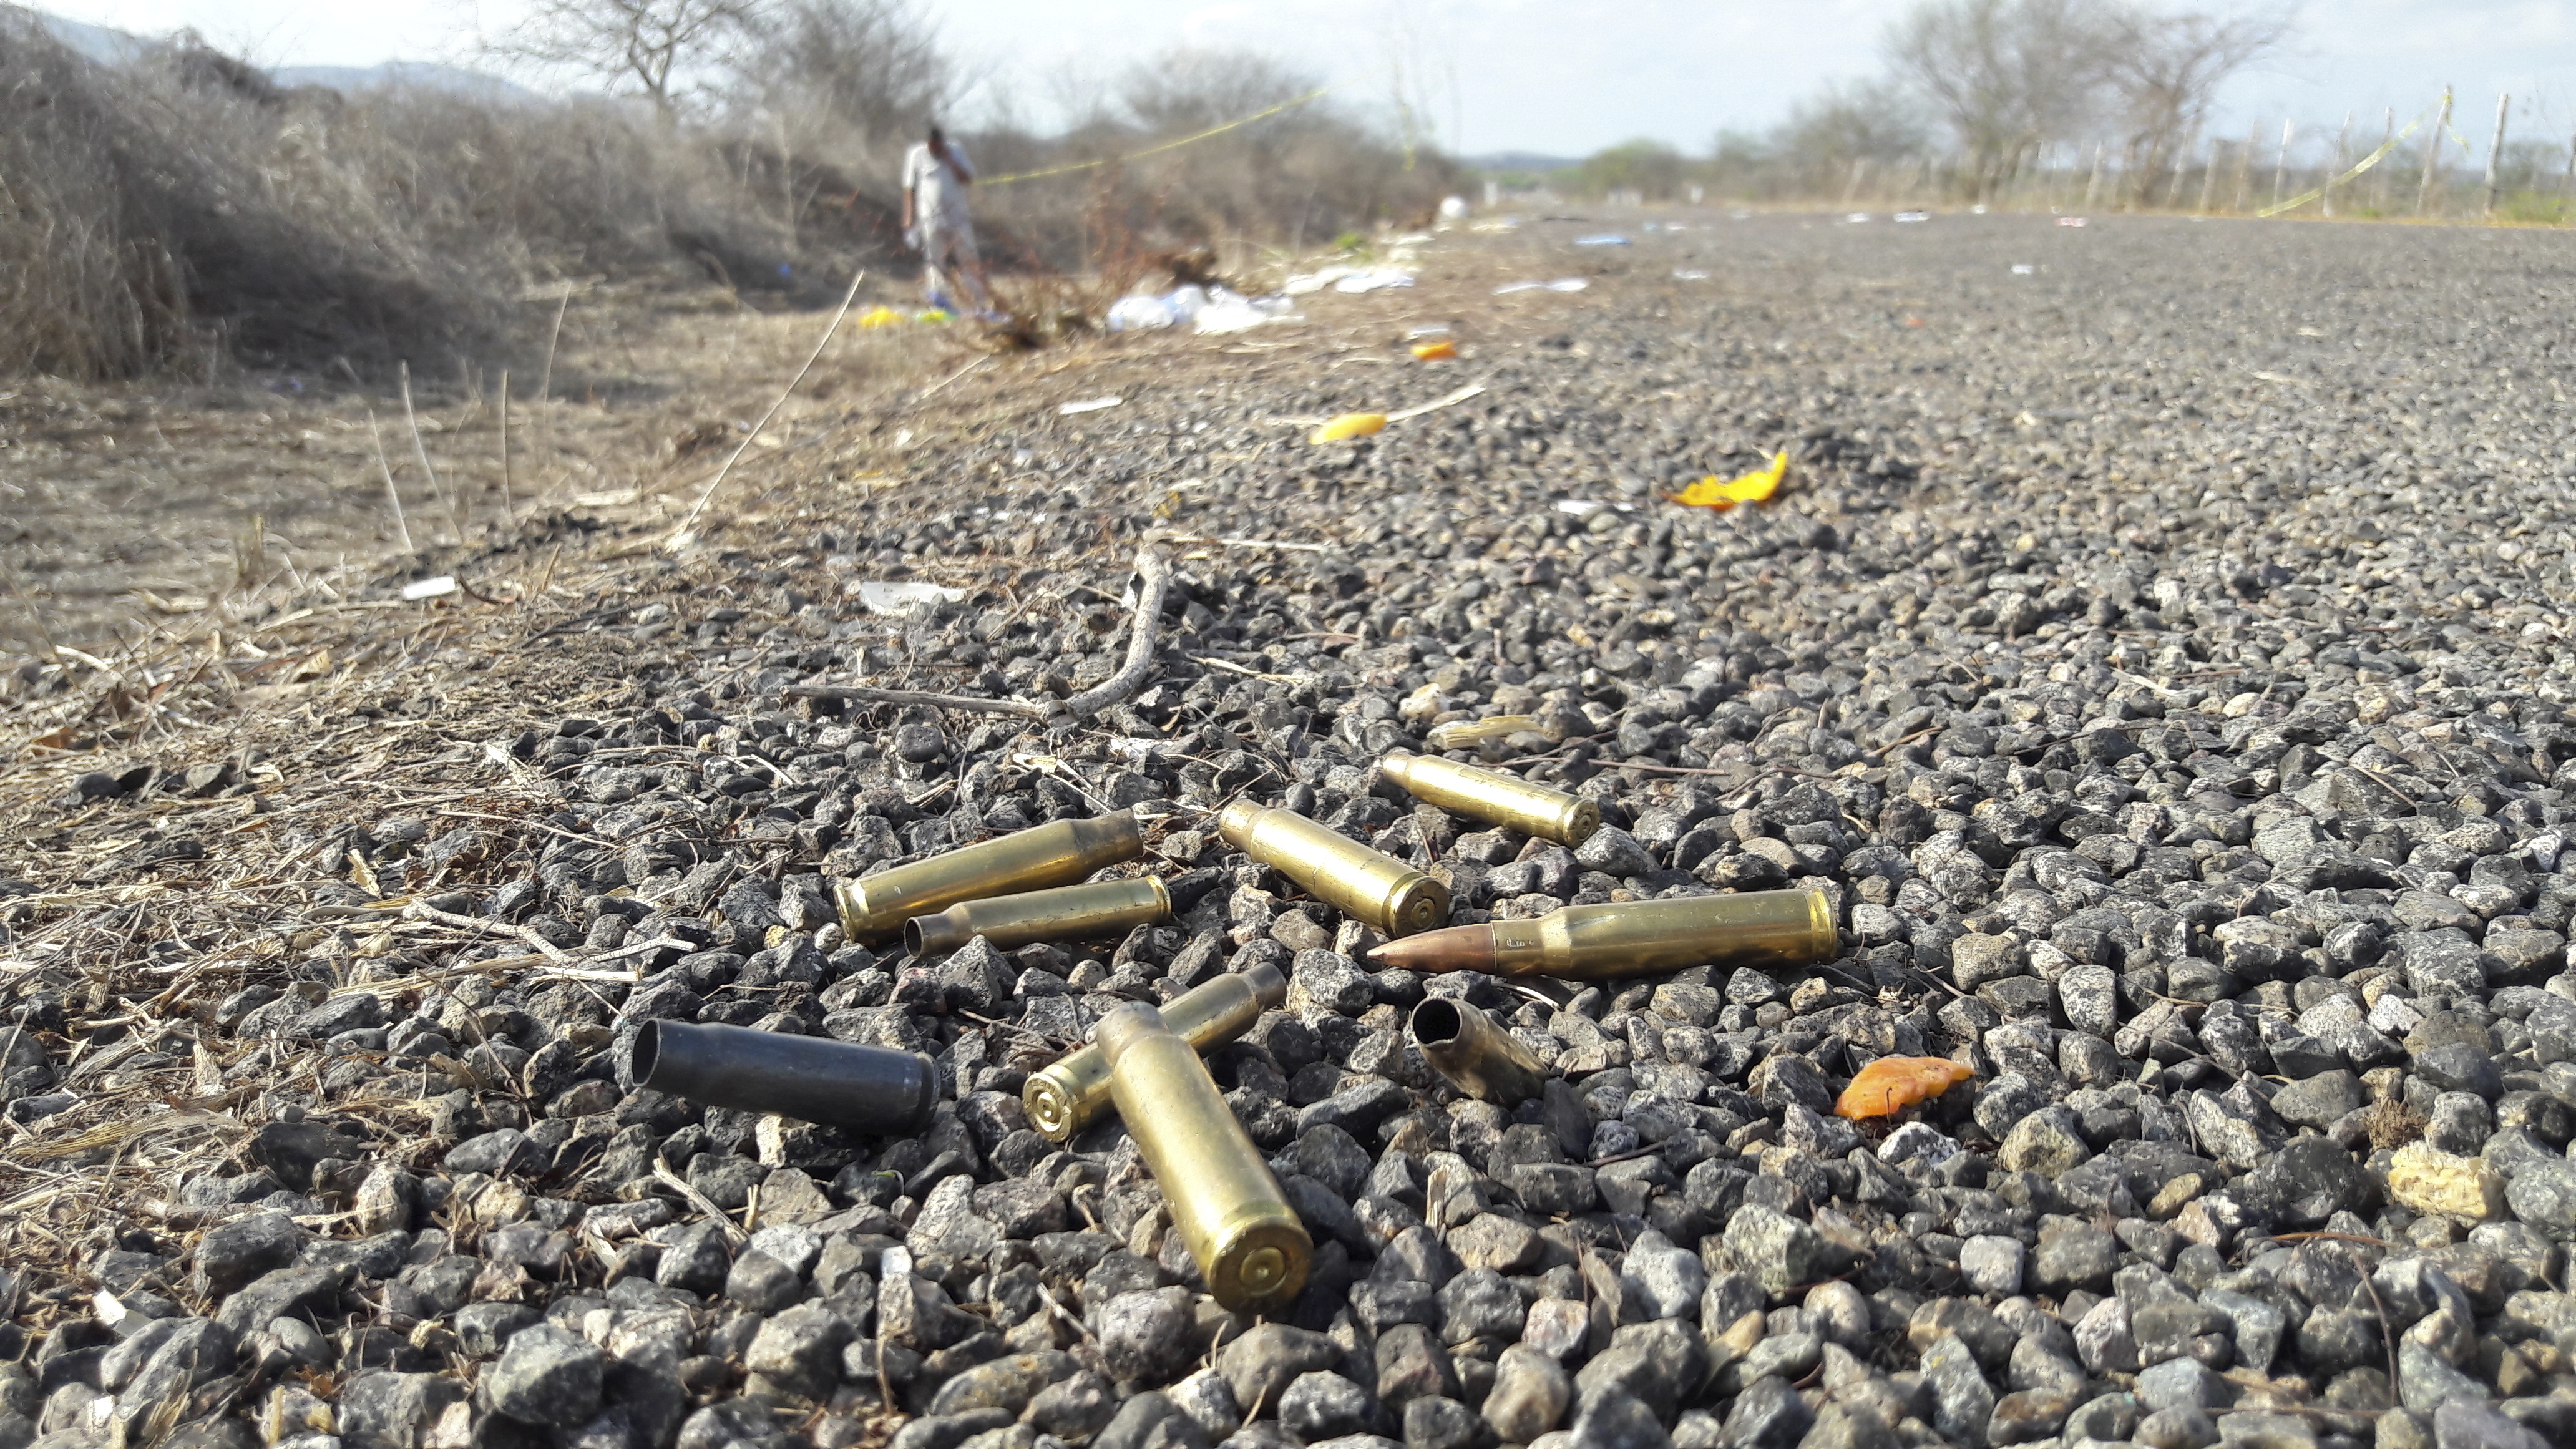 FILE - Bullet casings litter the road after authorities report a gun battle between gunmen near the beach resort of Mazatlan, Mexico, Saturday, July 1, 2017. Mexican authorities reported that at least 19 People were killed in clashes between gunmen and security forces in gang-dominated territory to the northwest of Sinaloa, where homicides have spiked dramatically after the capture and extradition of convicted drug lord Joaquín "El Chapo" Guzman.  (AP Photo/Mario Rivera Alvarado, File)